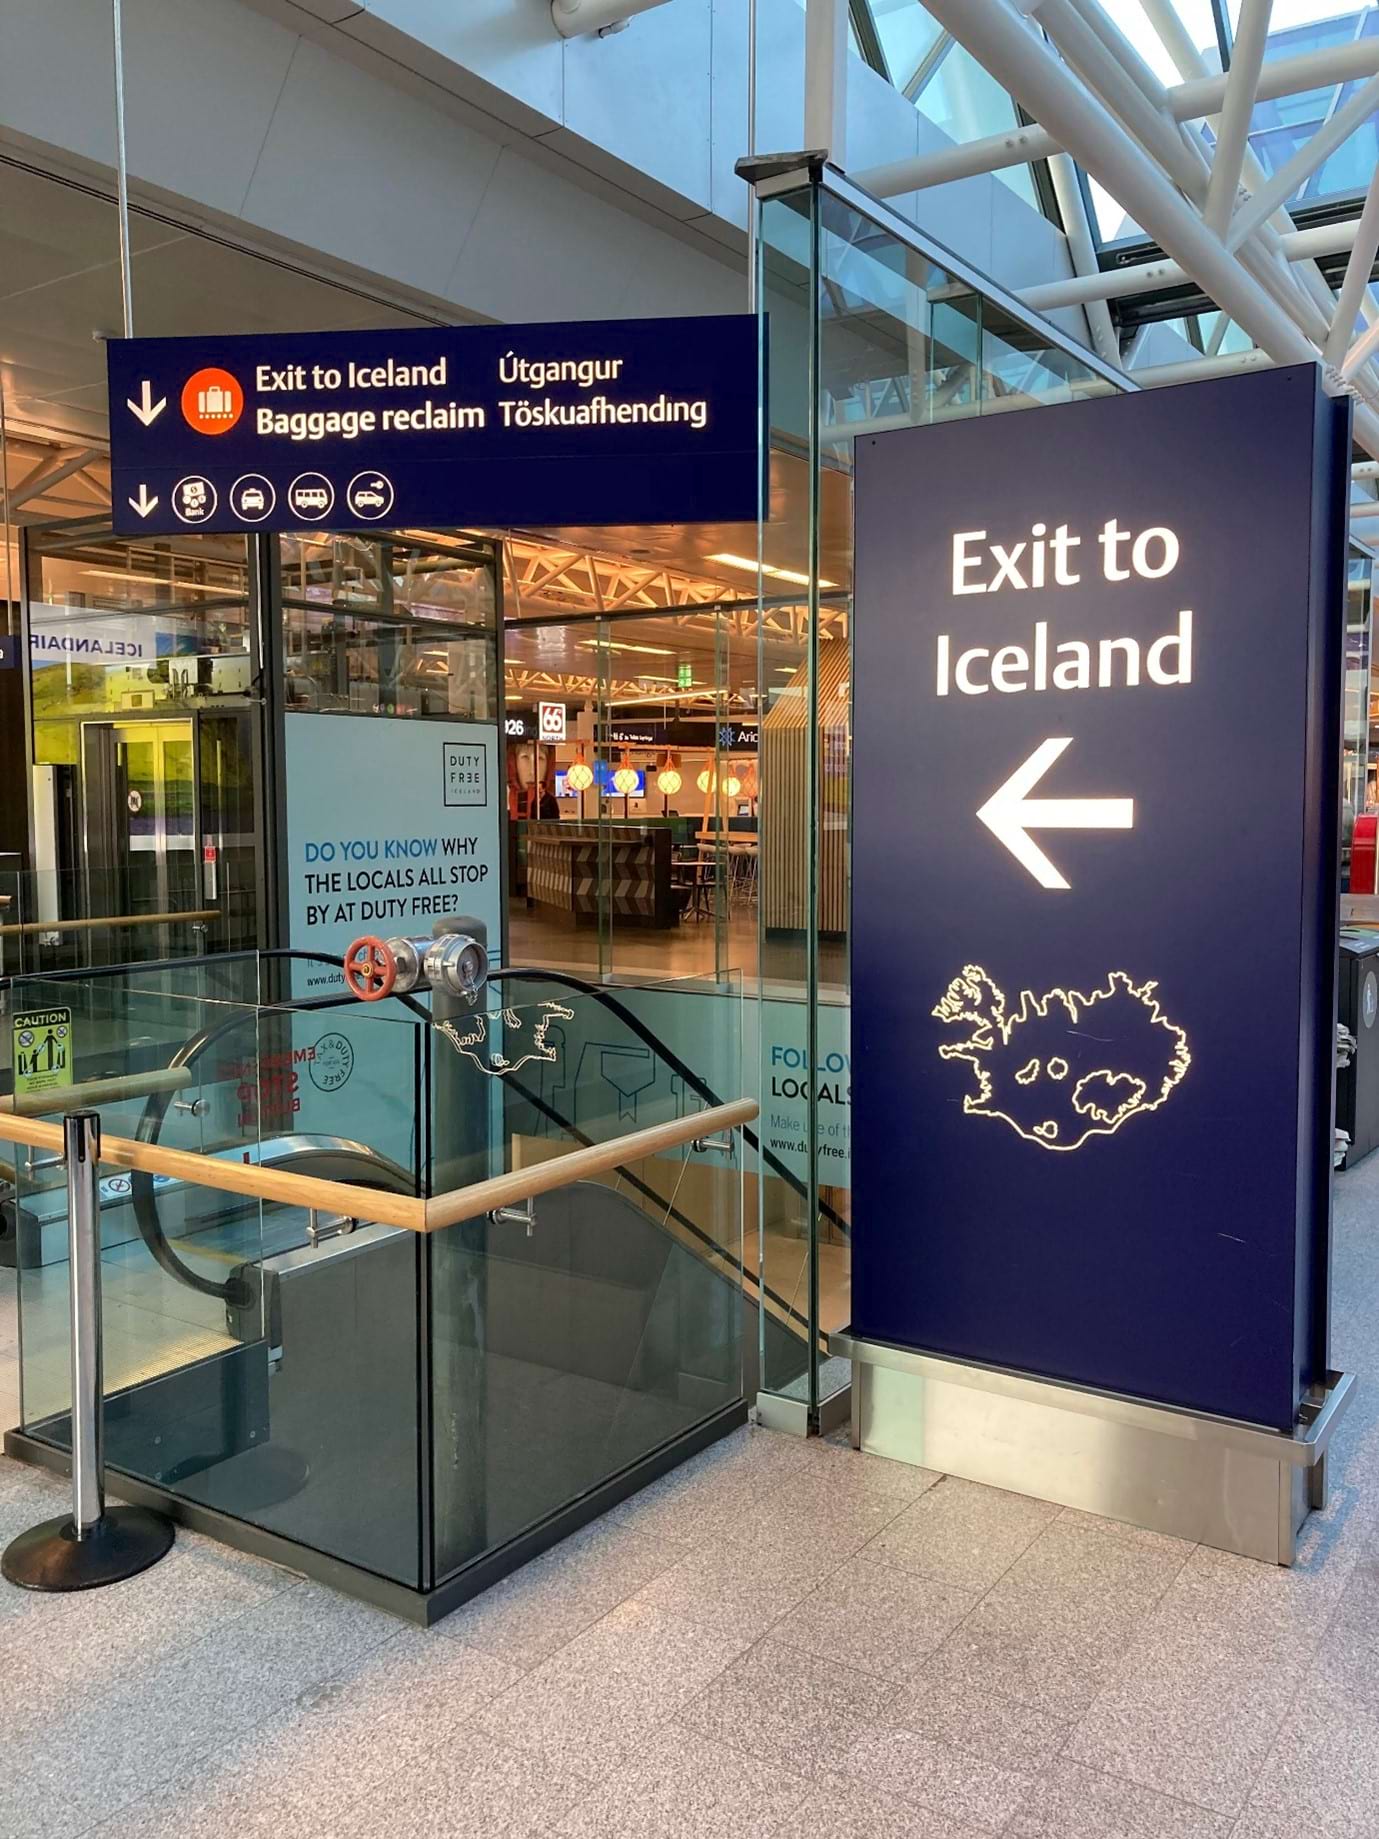 Exit to Iceland sign at KEF airport